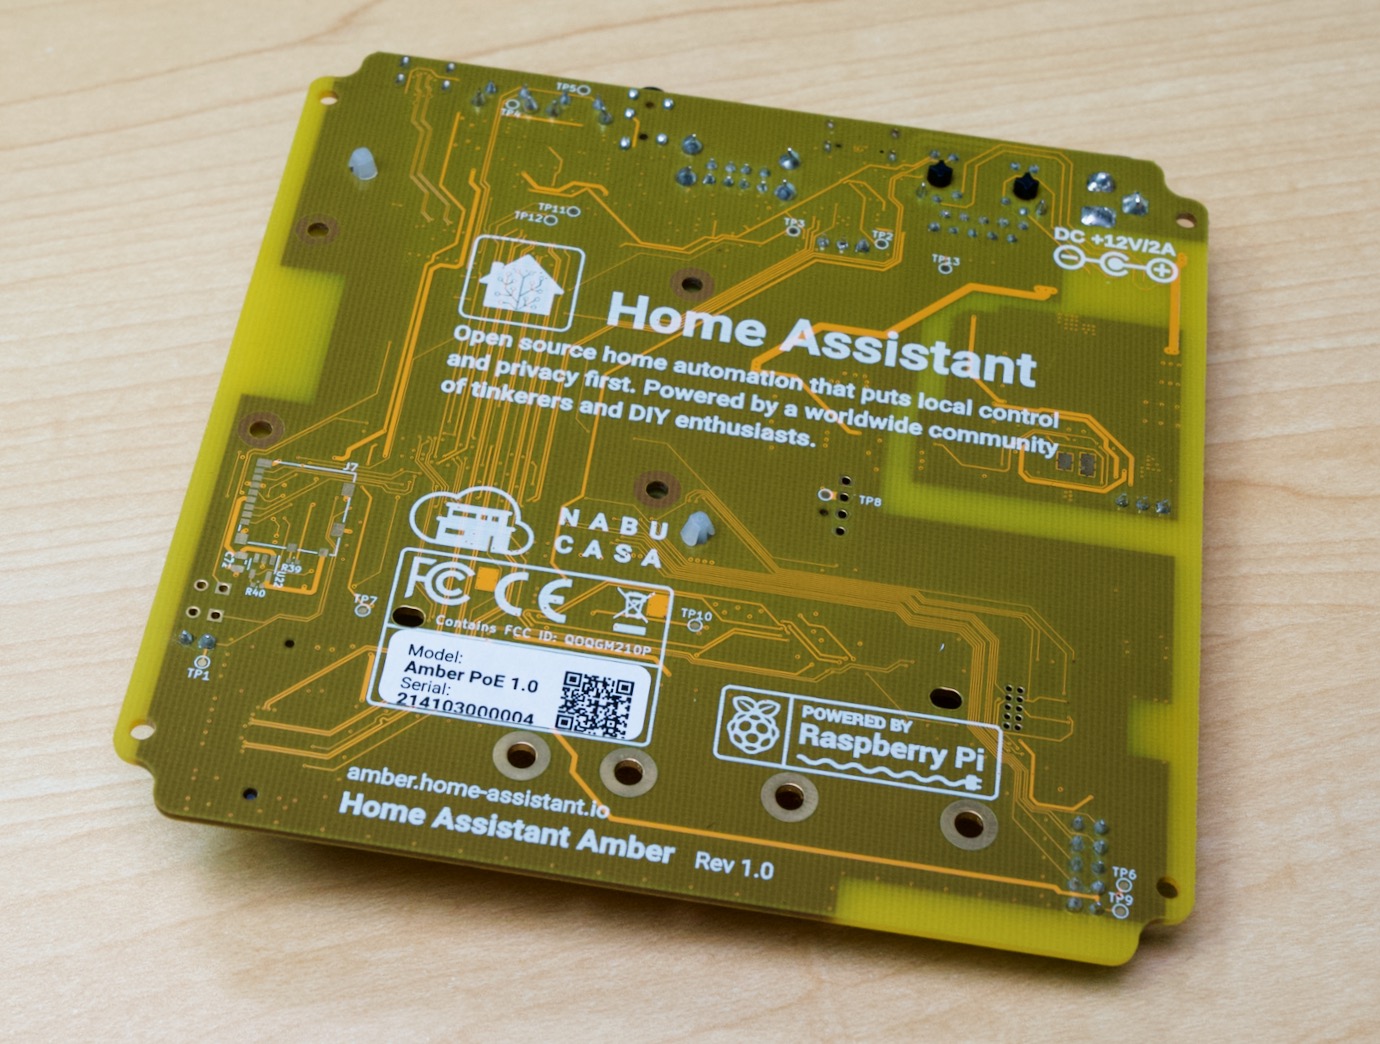 Home Assistant Yellow board - back side